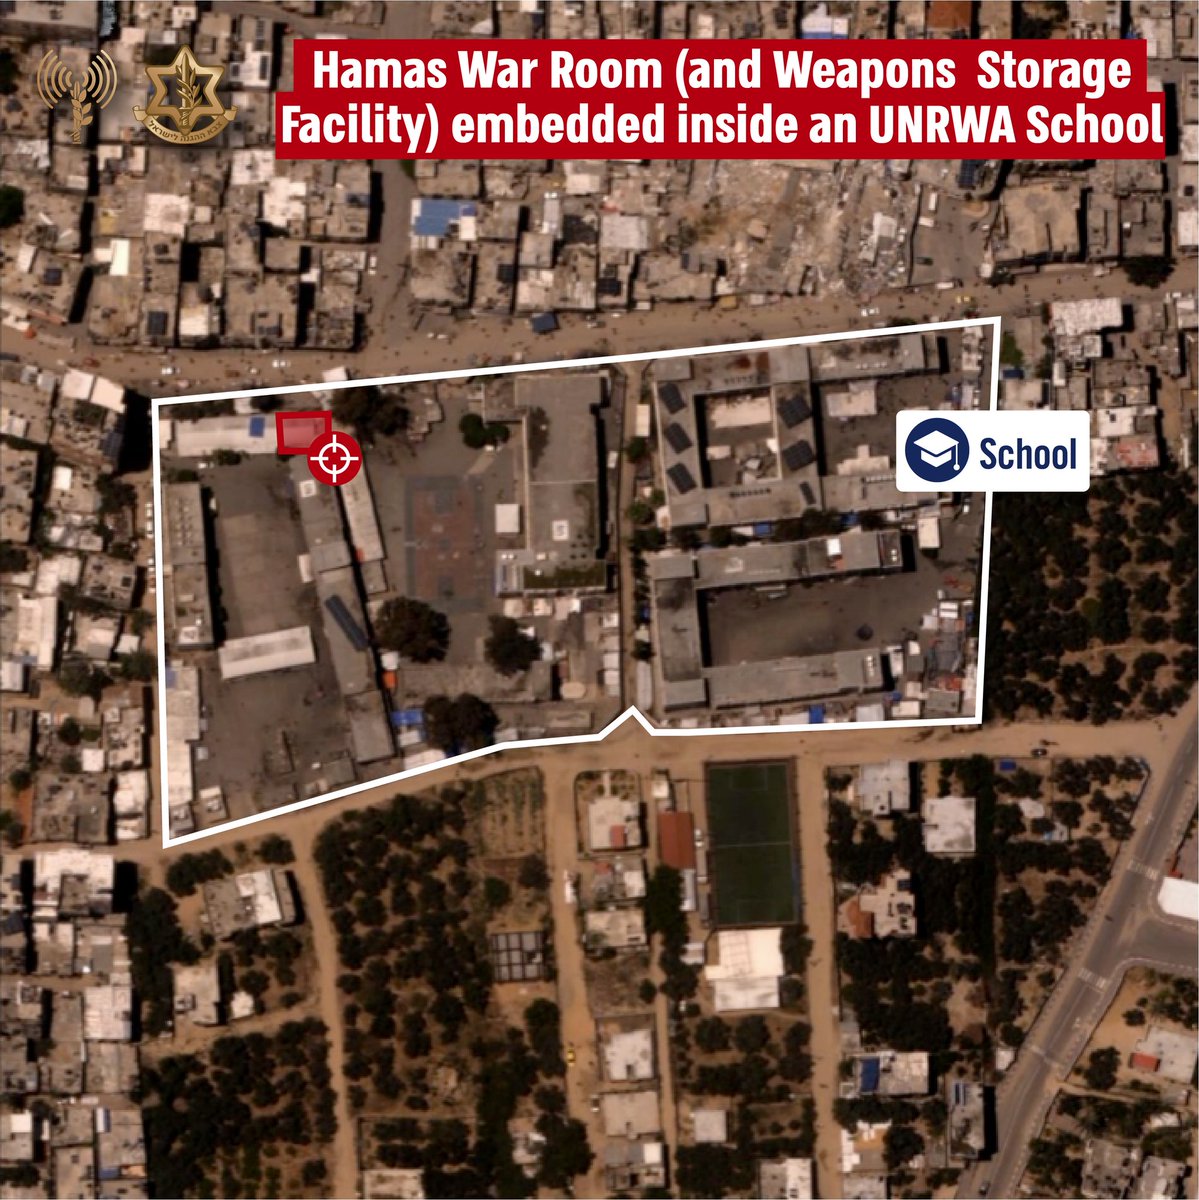 In a joint statement, the IDF and ISA say they found a Hamas operations rooms and weapons storage cache in an UNRWA school located in the Nuseirat area.